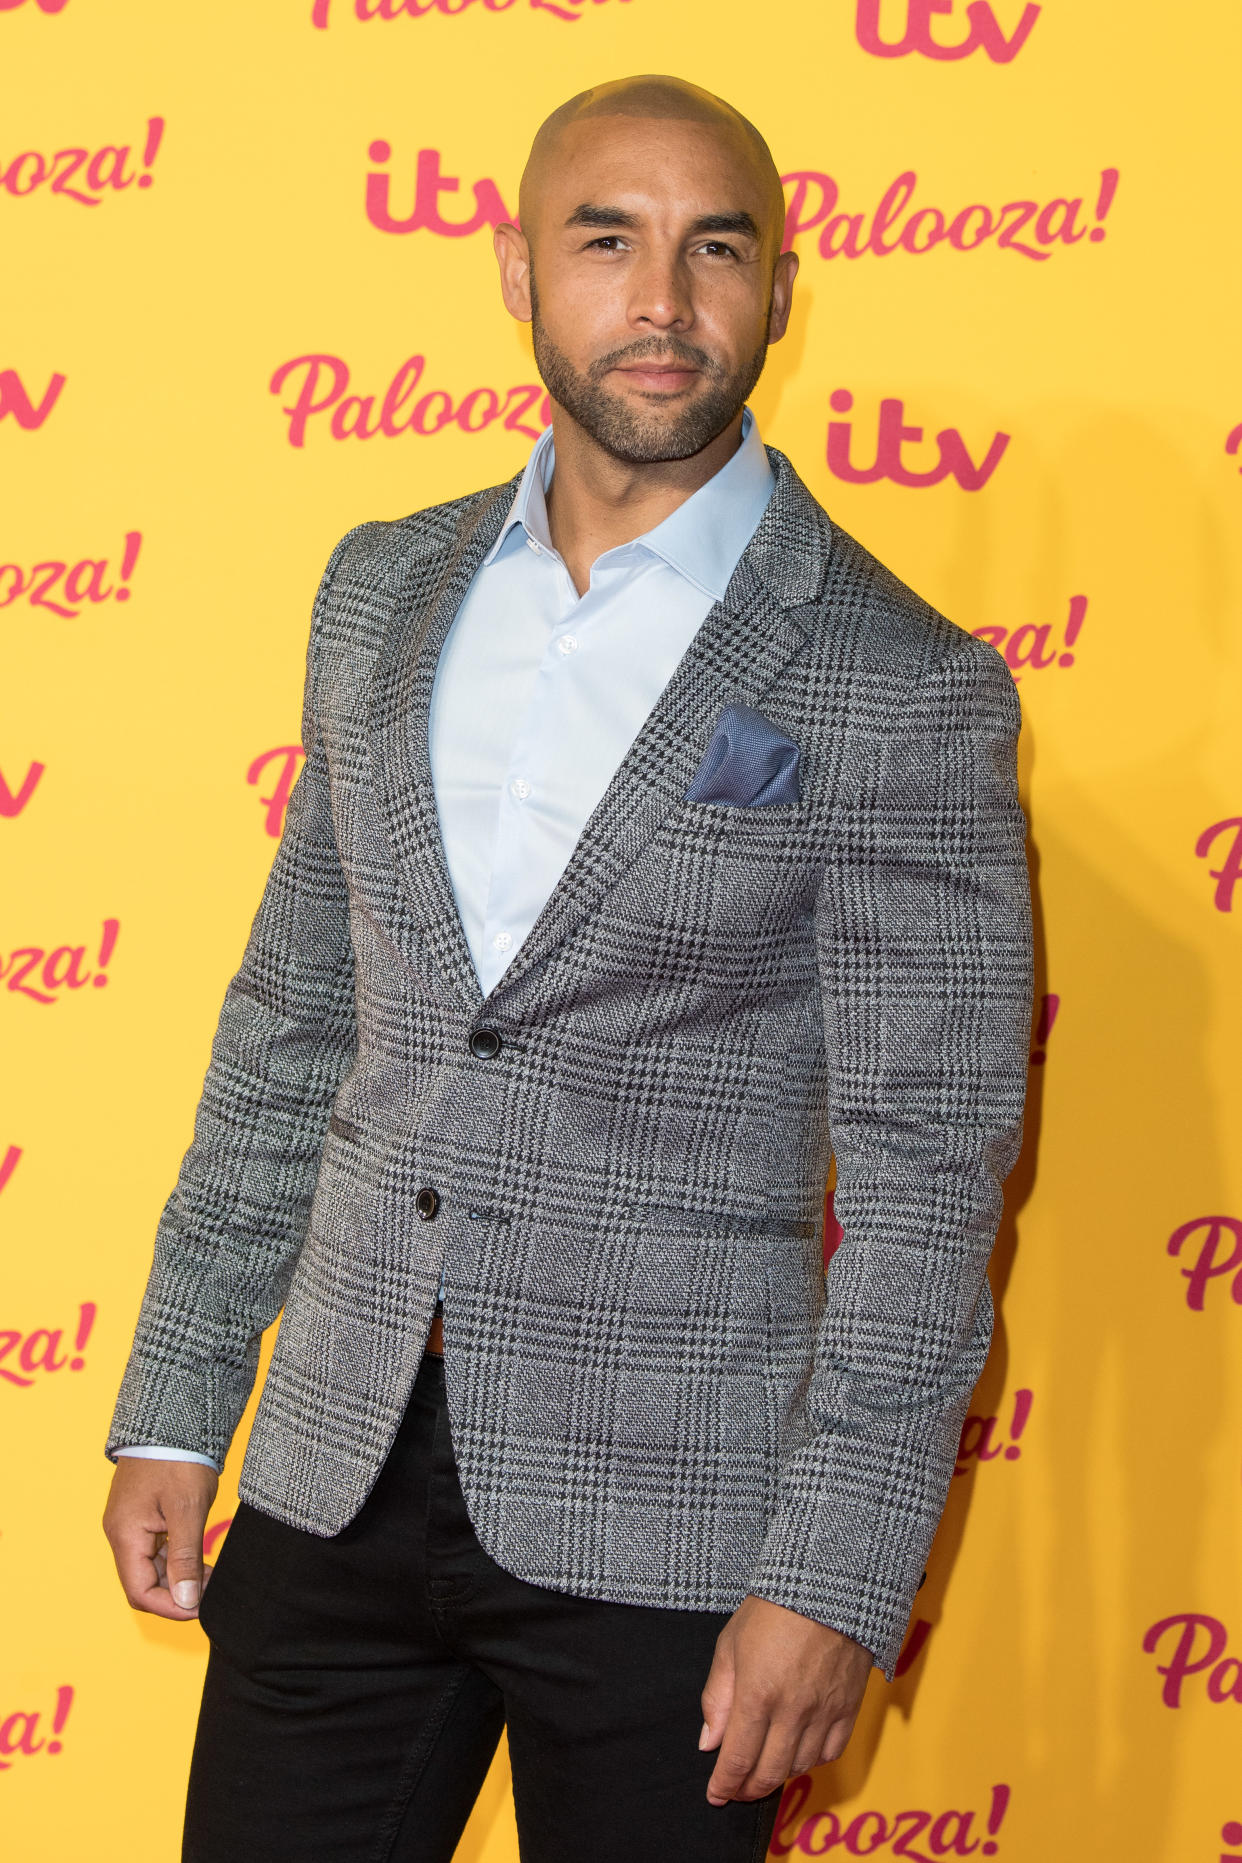 Alex Beresford attends the ITV Palooza! held at The Royal Festival Hall on October 16, 2018 in London, England.  (Photo by Jeff Spicer/WireImage)